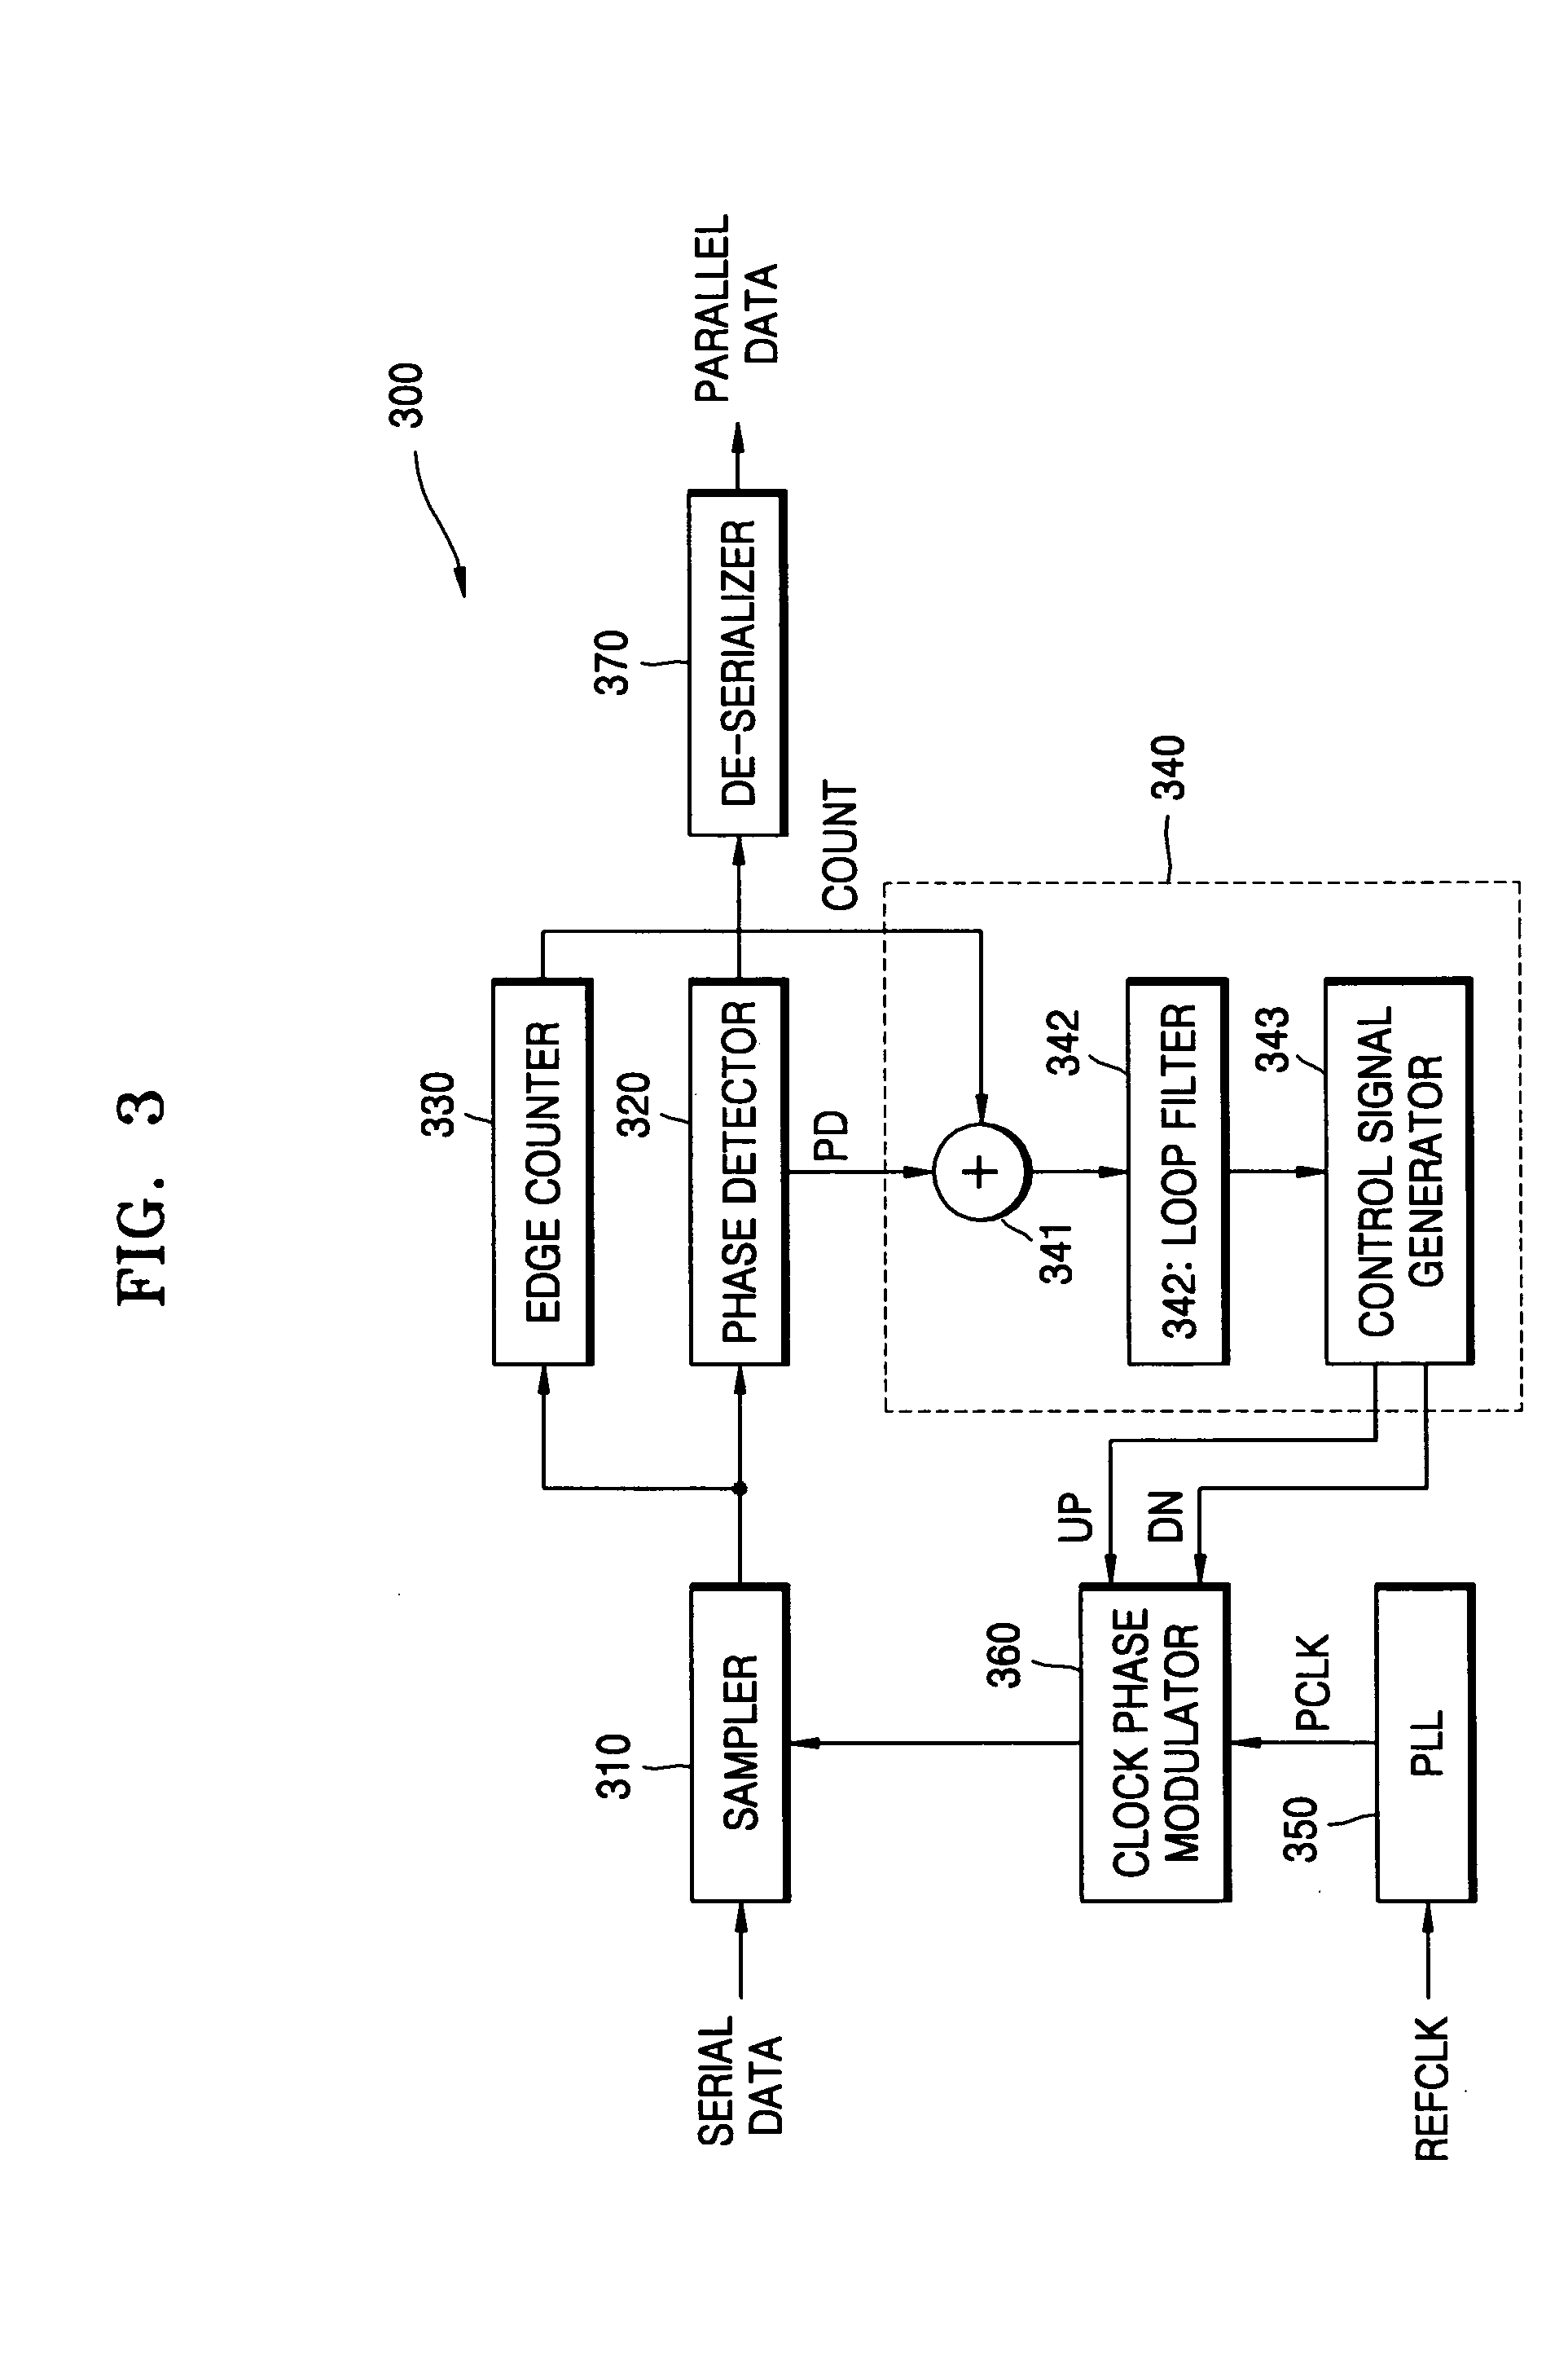 Clock recovery systems and methods for adjusting phase offset according to data frequency